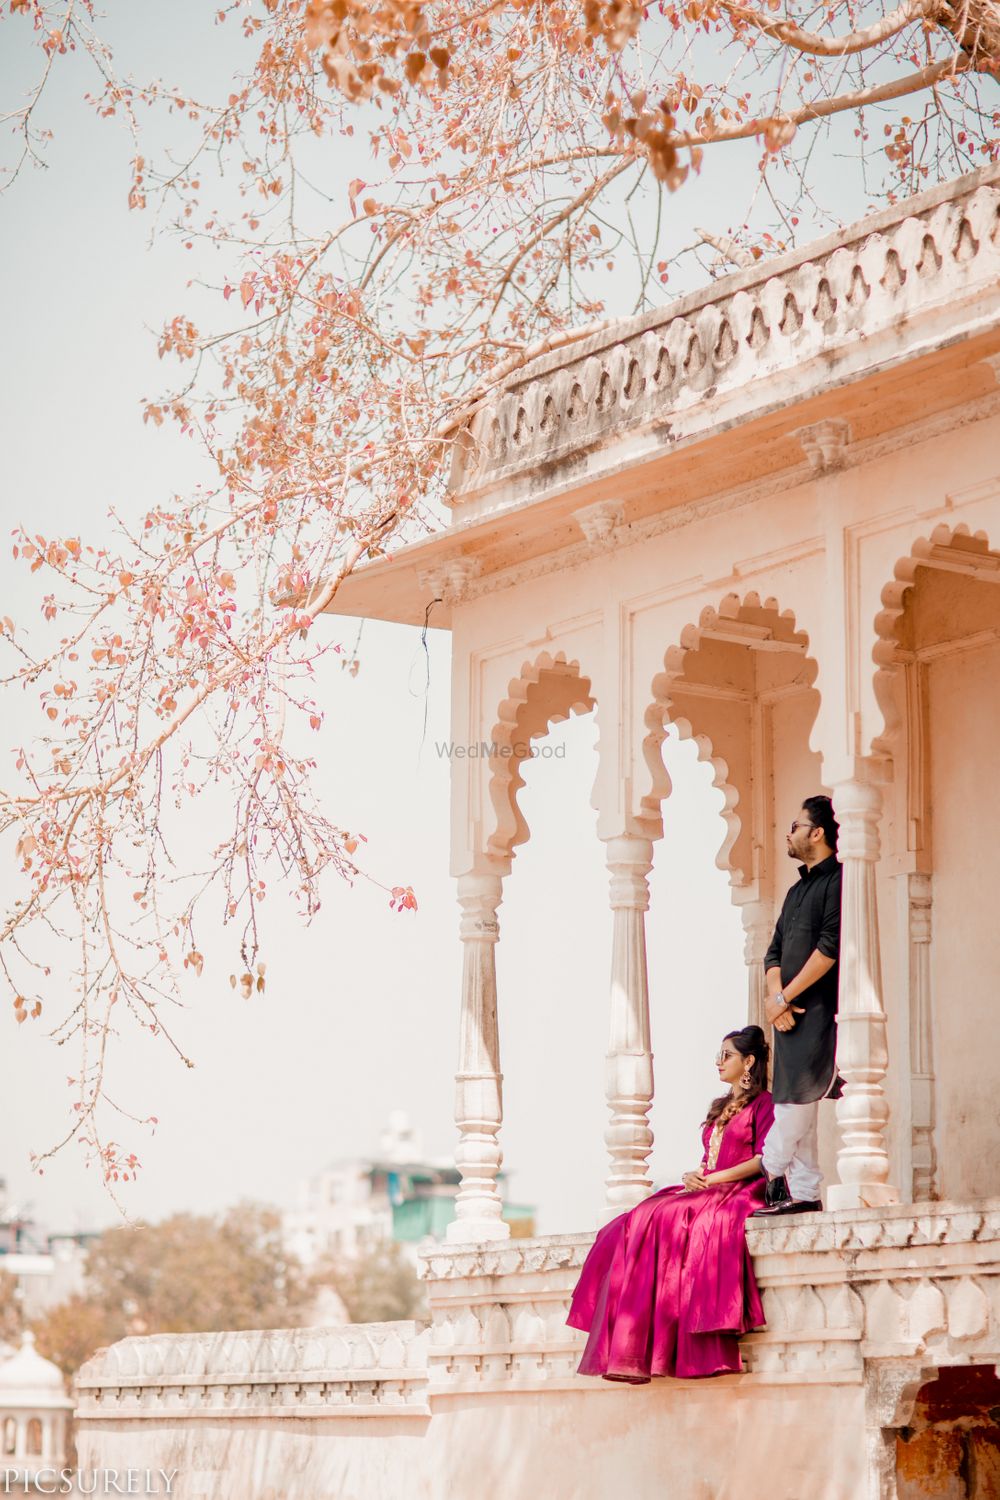 Photo From Nishit & Sahlini Pre Wedding - Udaipur - By Picsurely